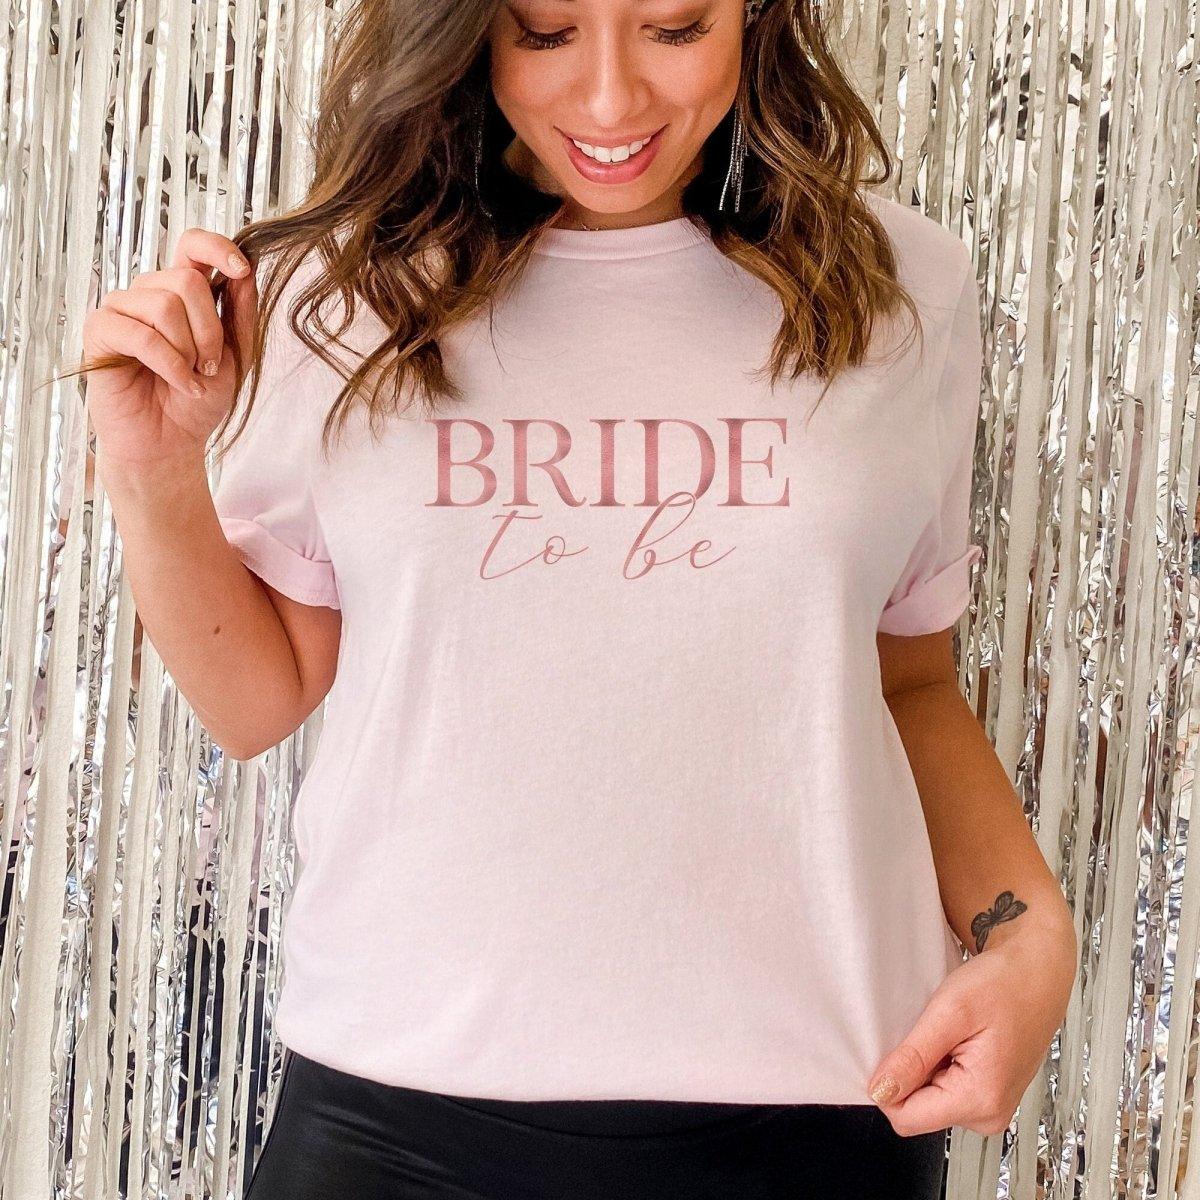 Bride T-Shirt, Wife To Be T-Shirt, Engagement T-Shirts, Personalised Wedding Gifts, Hen Party Top, Bride To Be T-shirts, Bride Tops, Bridal - Amy Lucy